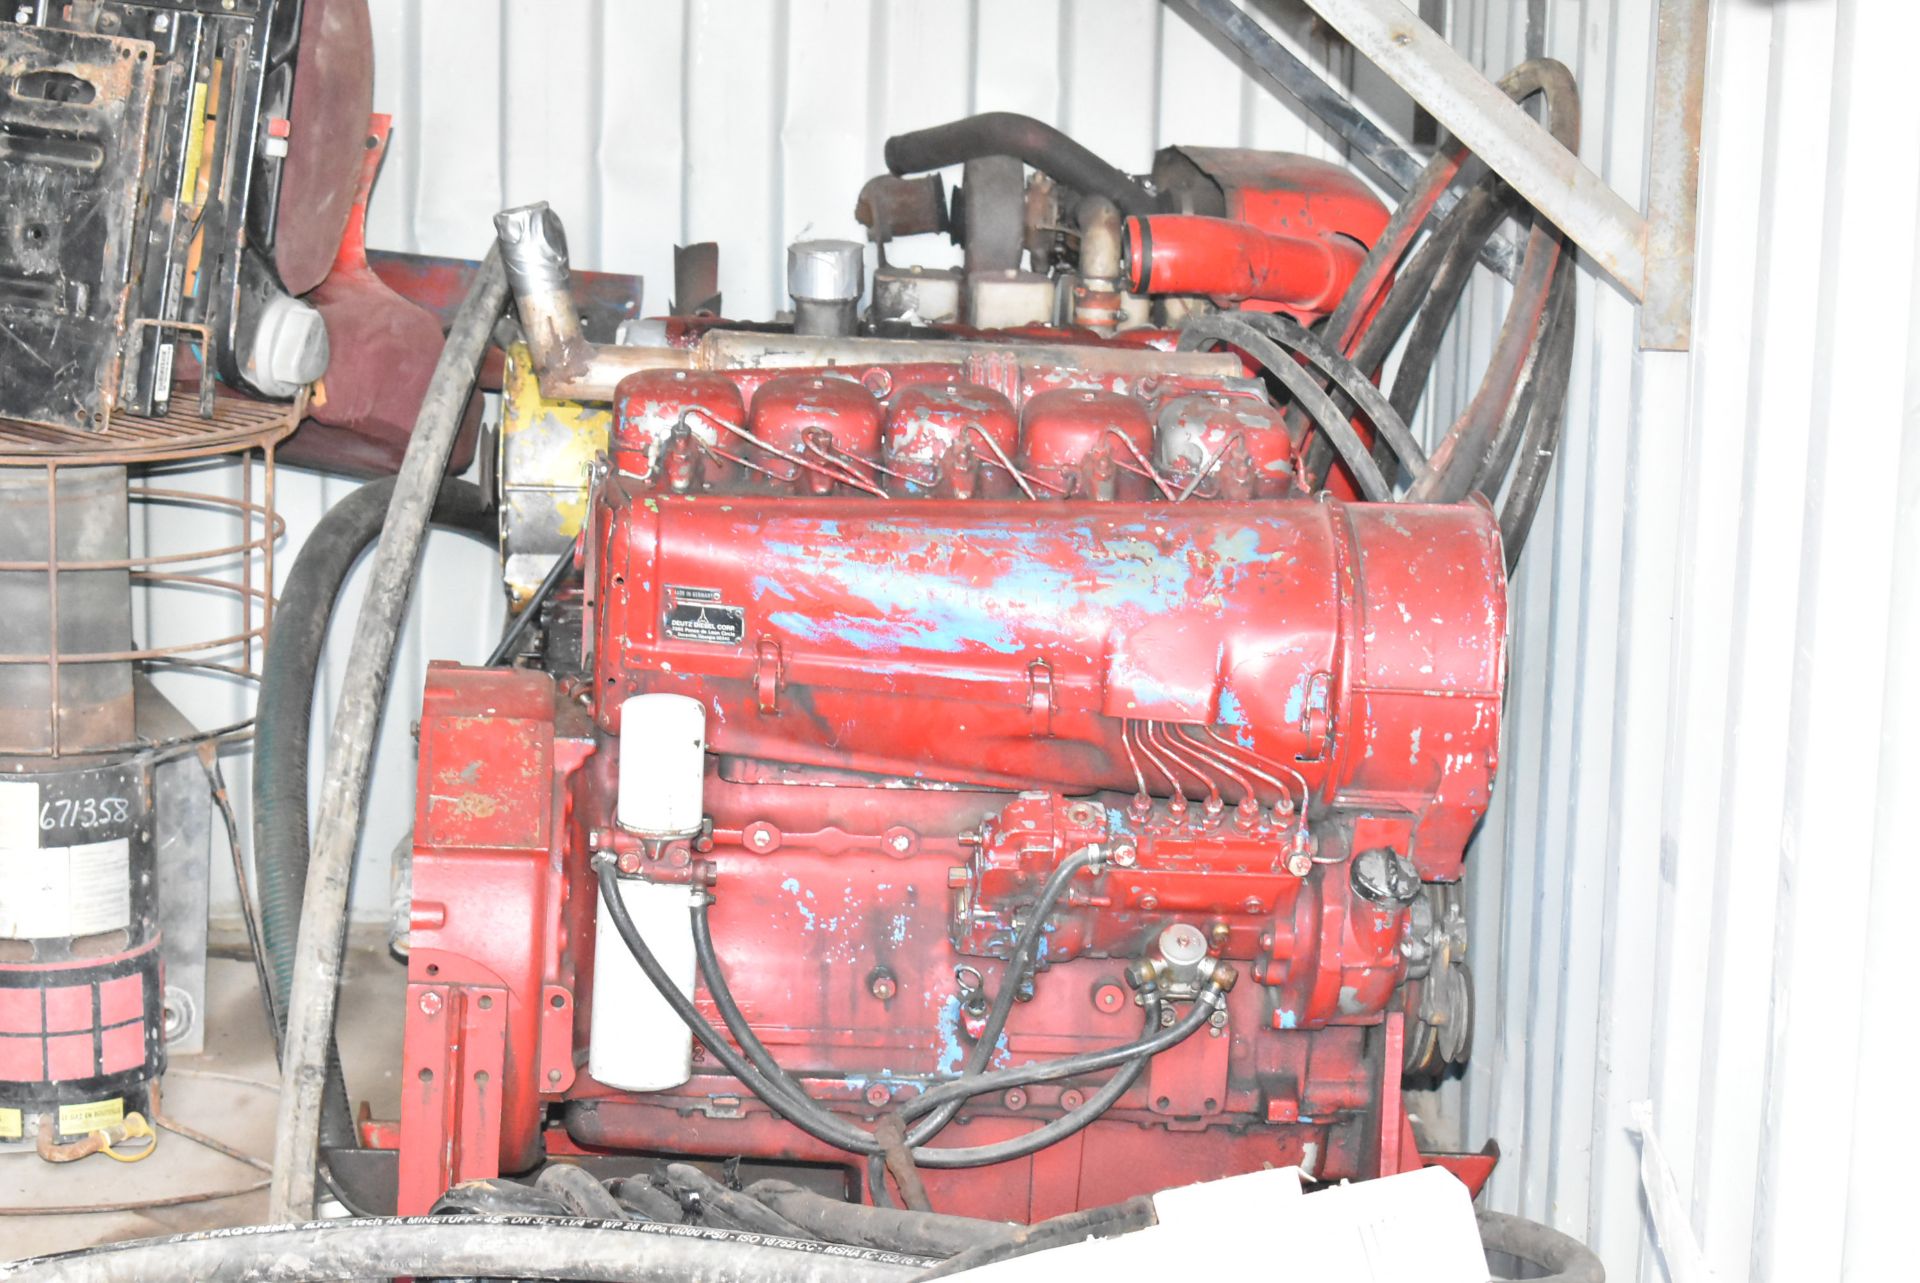 LOT/ CONTENTS OF CONTAINER CONSISTING OF DIESEL ENGINES, HYDRAULIC PARTS, HOSE & COMPONENTS - Image 3 of 3